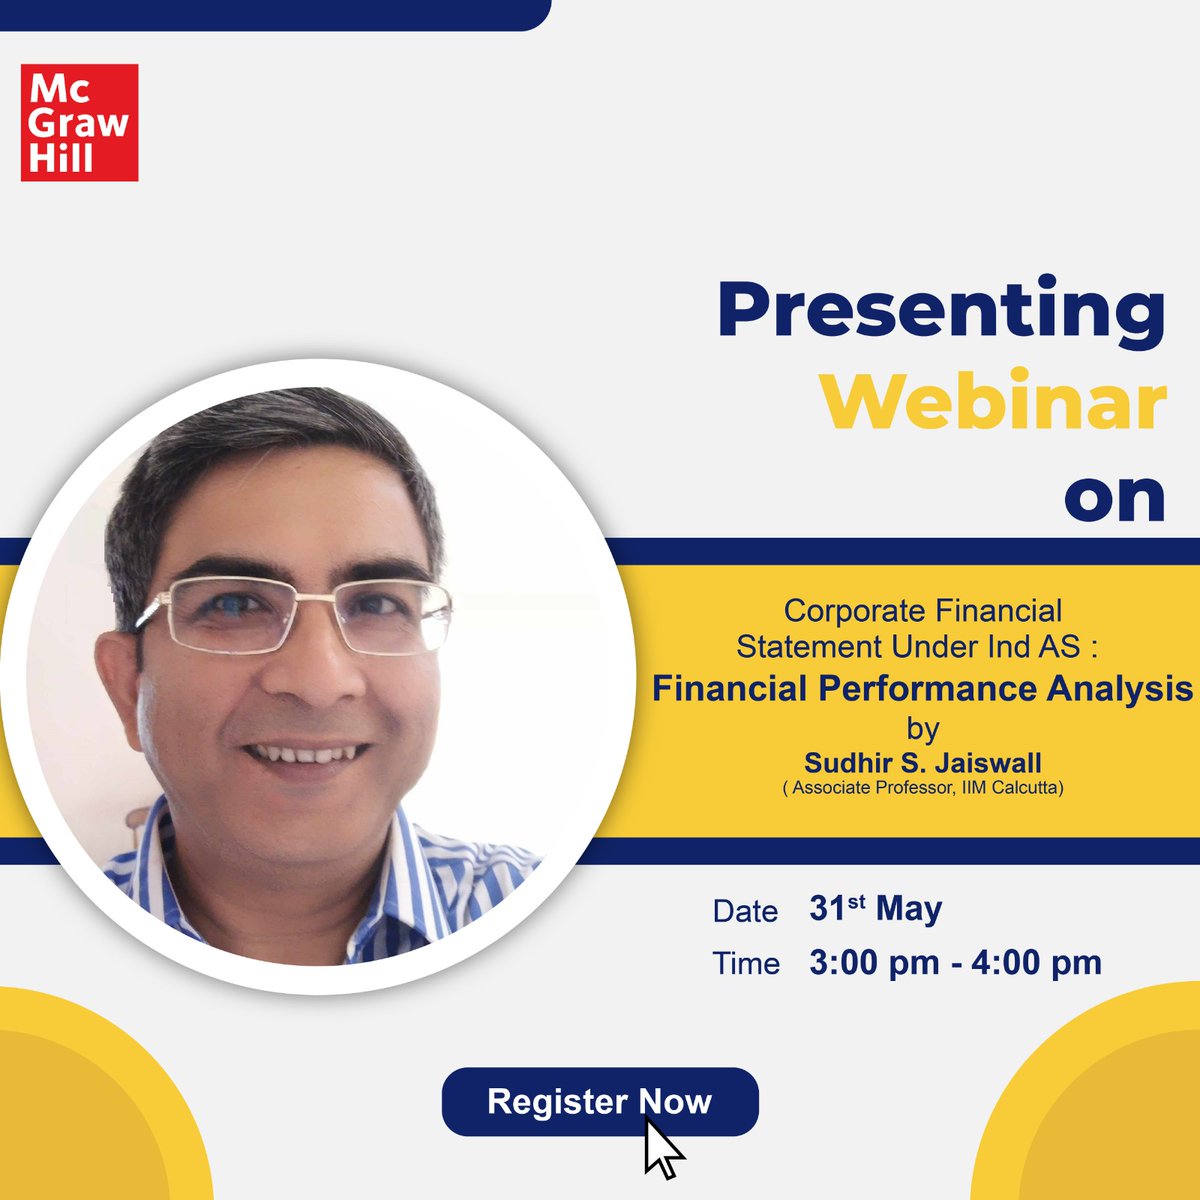 Join us for Webinar on Corporate Financial Statement Under Ind AS: Financial Performance Analysis with speaker Sudhir S. Jaiswall ( Associate Professor, IIM Calcutta) on 31st May 2023, 3-4 PM. 

Click here to Register:  bit.ly/45zySOb

#Webinar #CorporateFinance